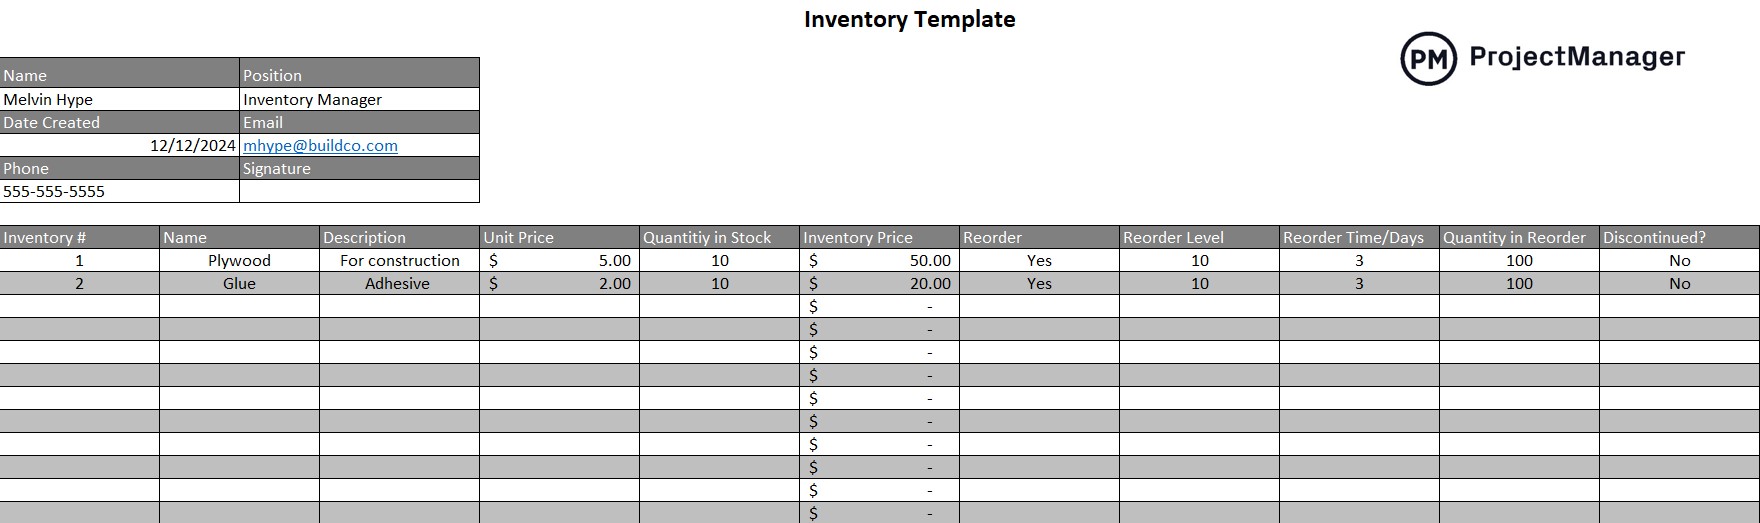 ProjectManager's inventory template, a Manufacturing Excel Template